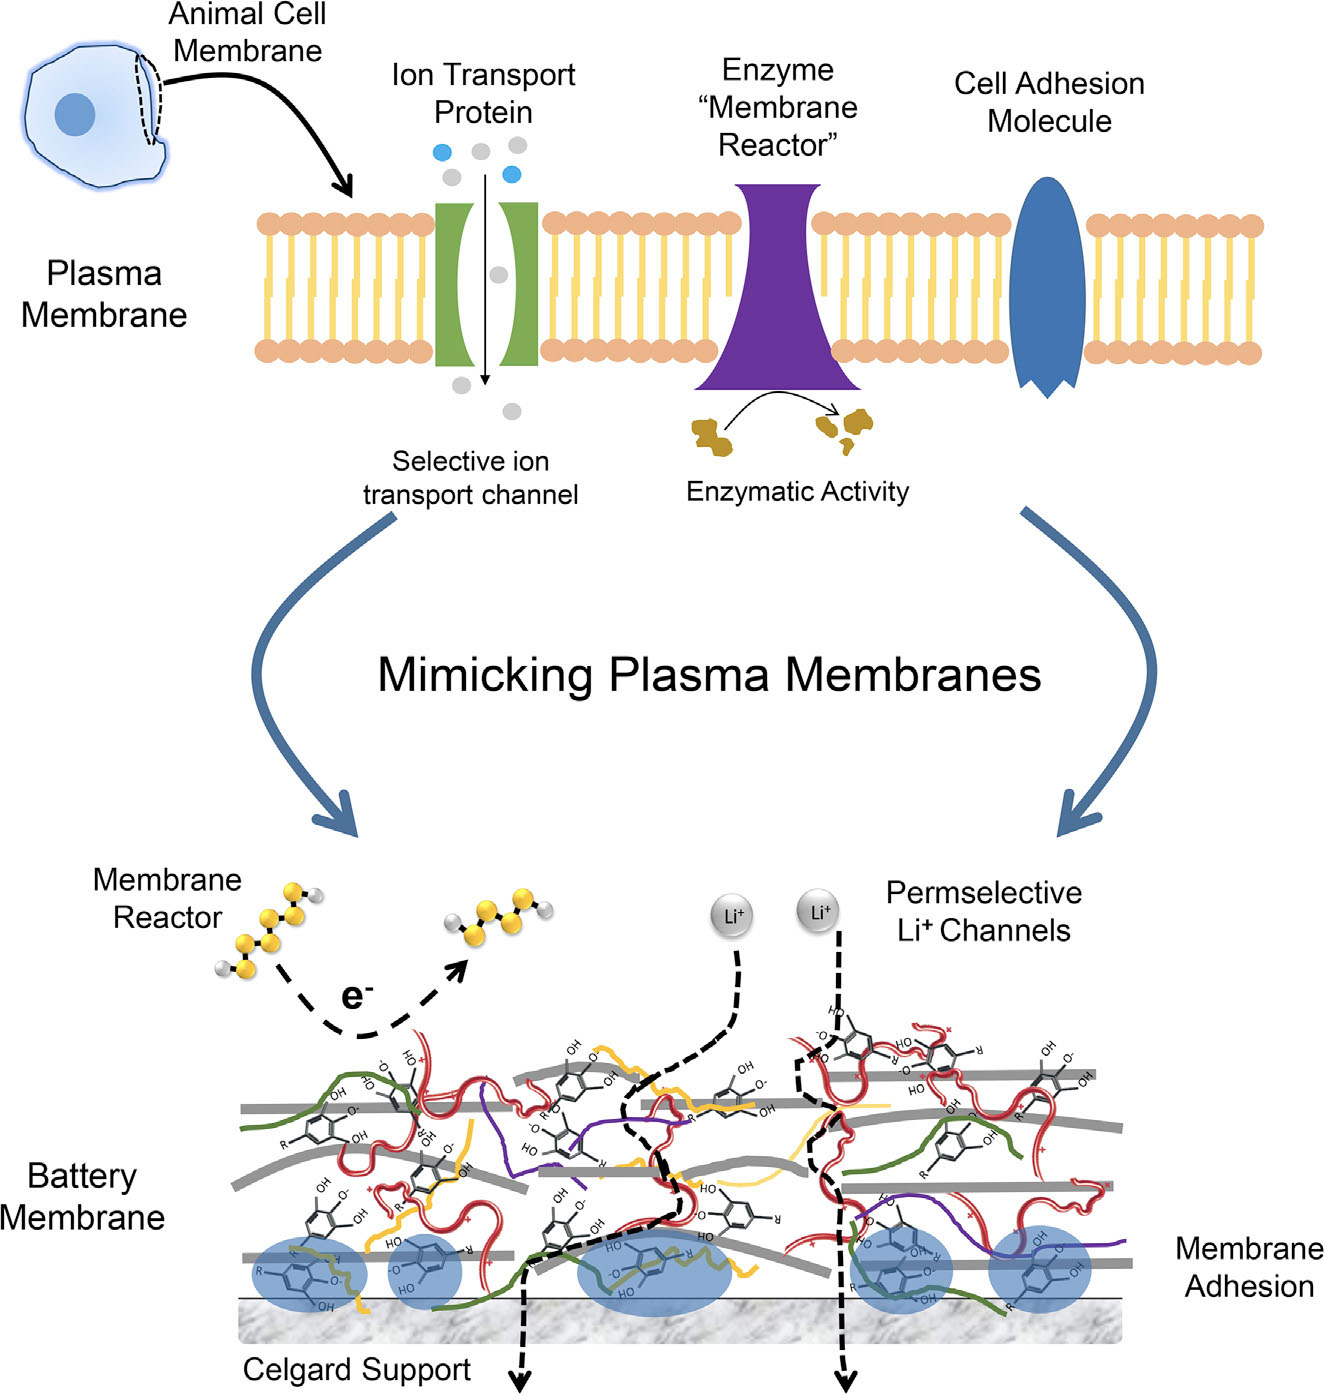 Schematic depicting the analogy between a plasma membrane and the EPL-rGO membrane